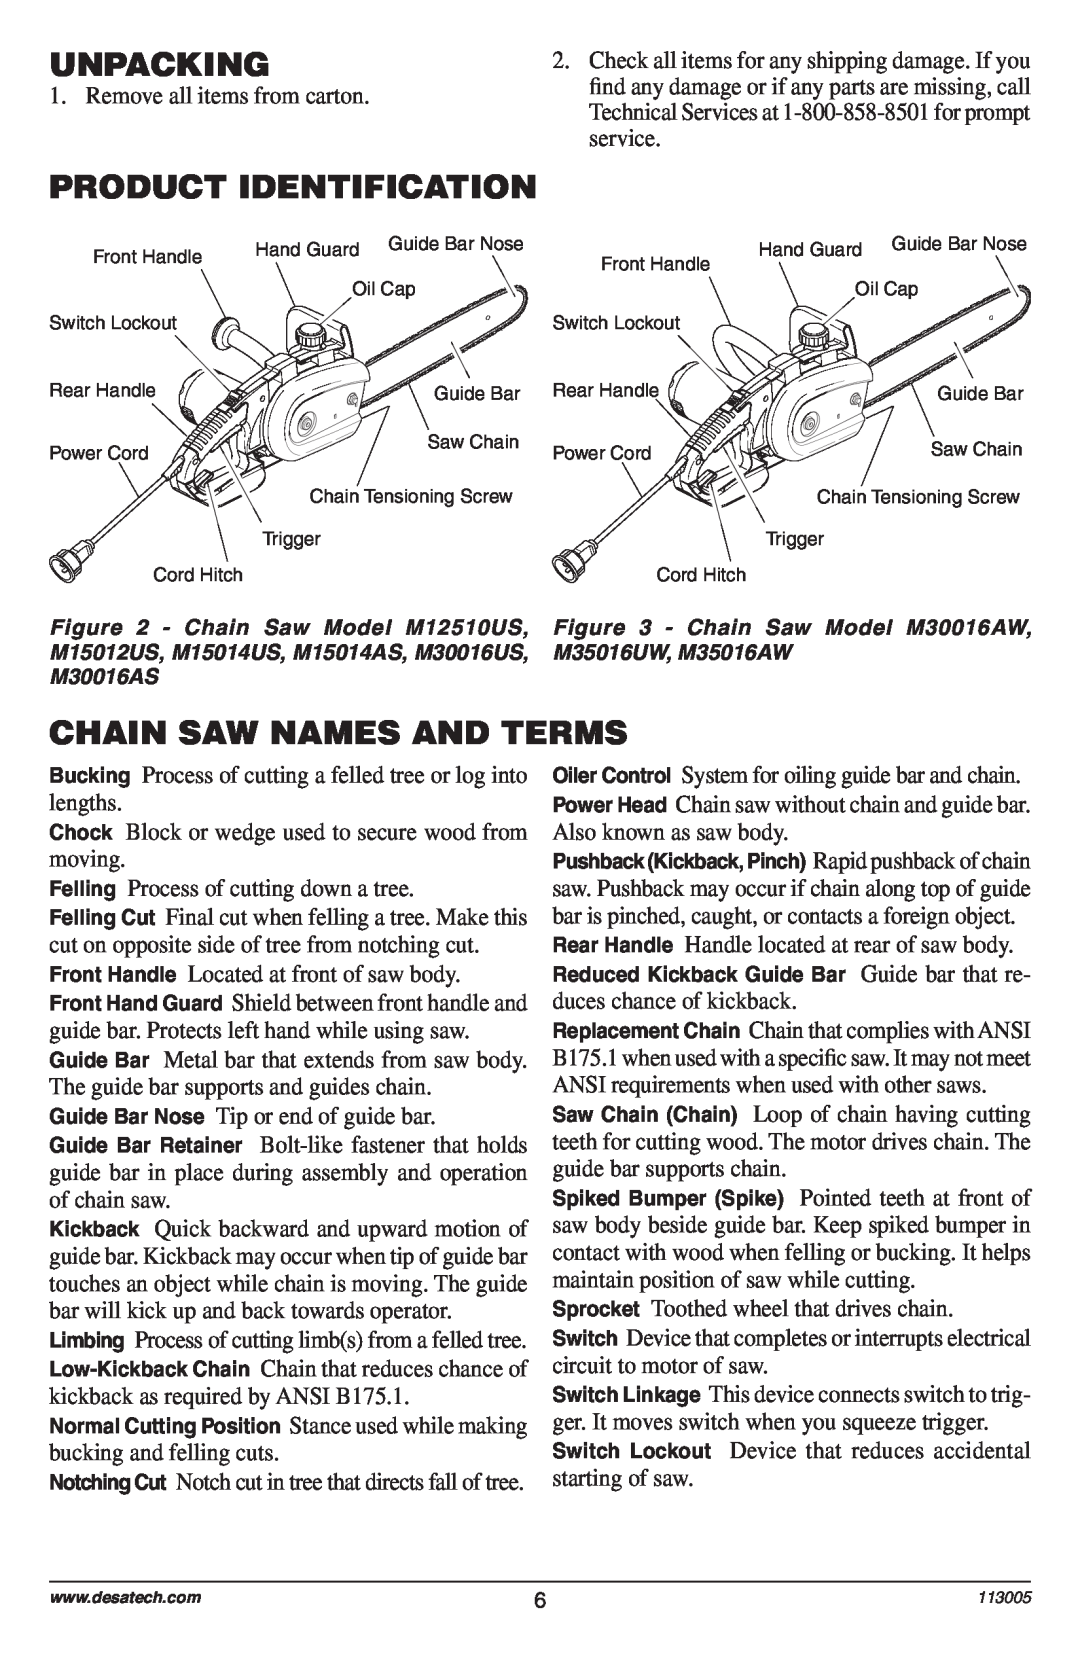 Remington Power Tools Electric Chain Saw owner manual Unpacking, Product Identification, Chain Saw Names And Terms 